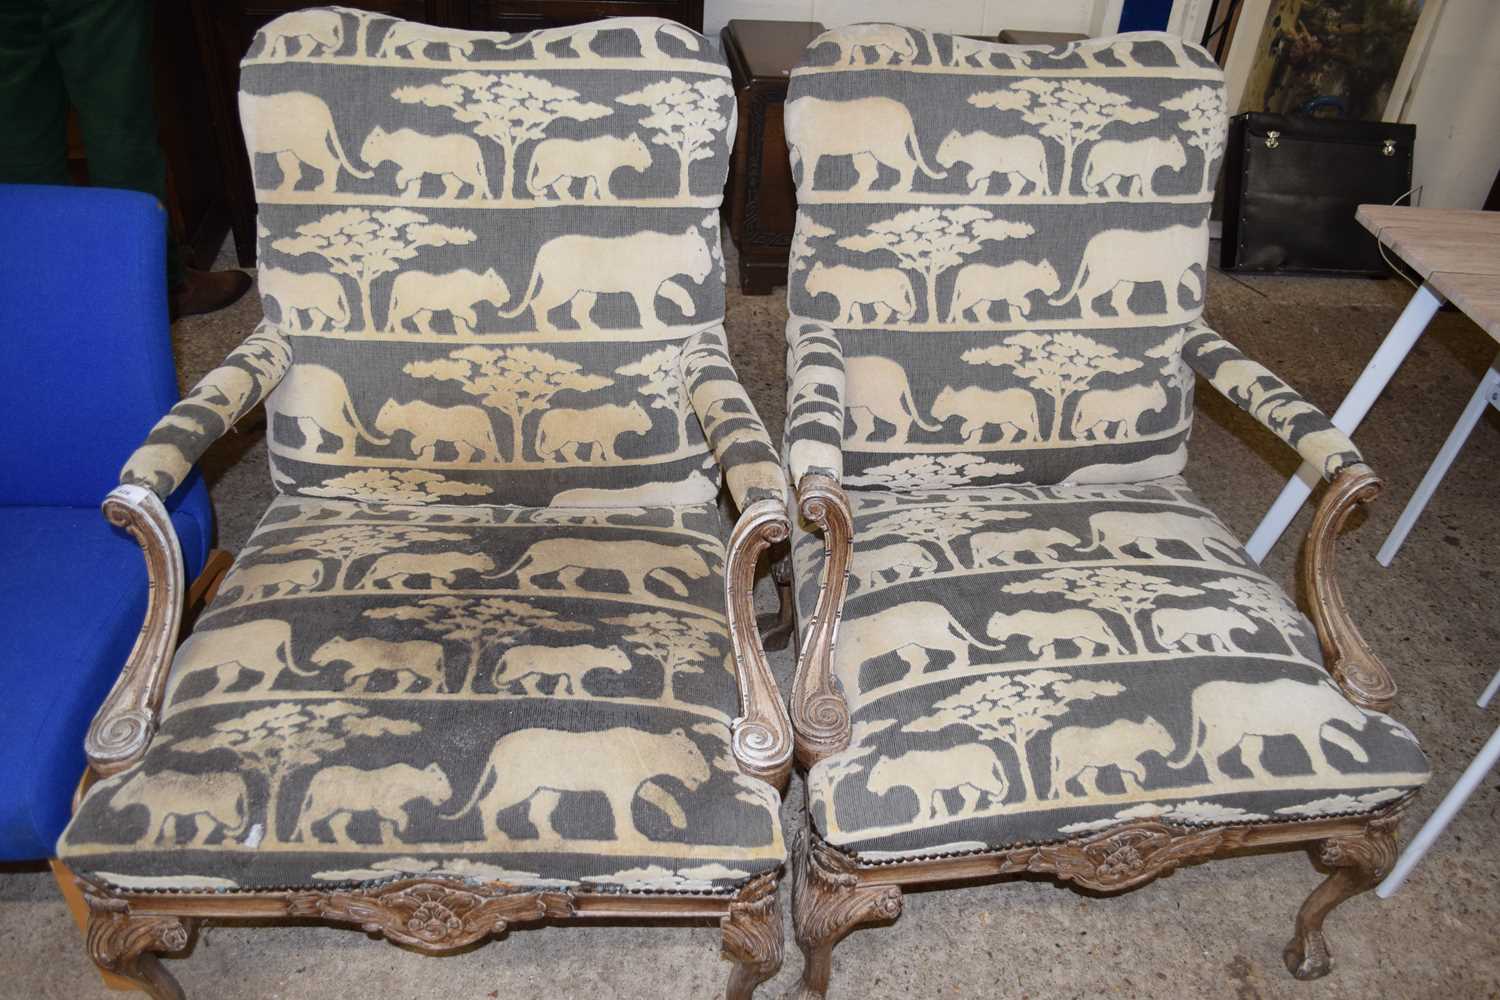 PAIR OF 19TH CENTURY STYLE ARMCHAIRS DECORATED WITH ANIMAL UPHOLSTERED FABRIC (A/F)